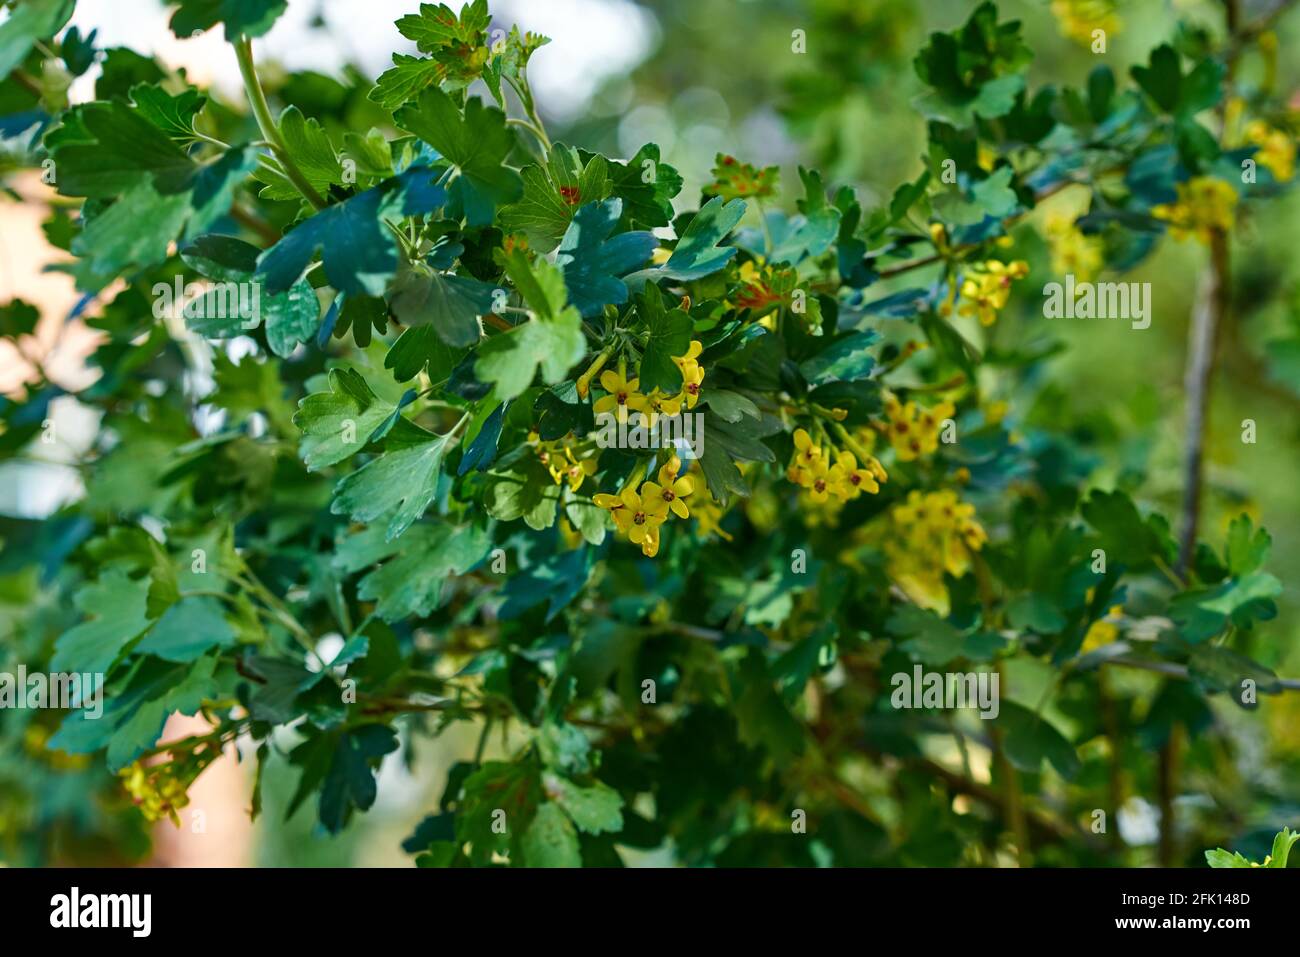 Small yellow inflorescences, strewn with thin branches of the bush. Blurred background Stock Photo